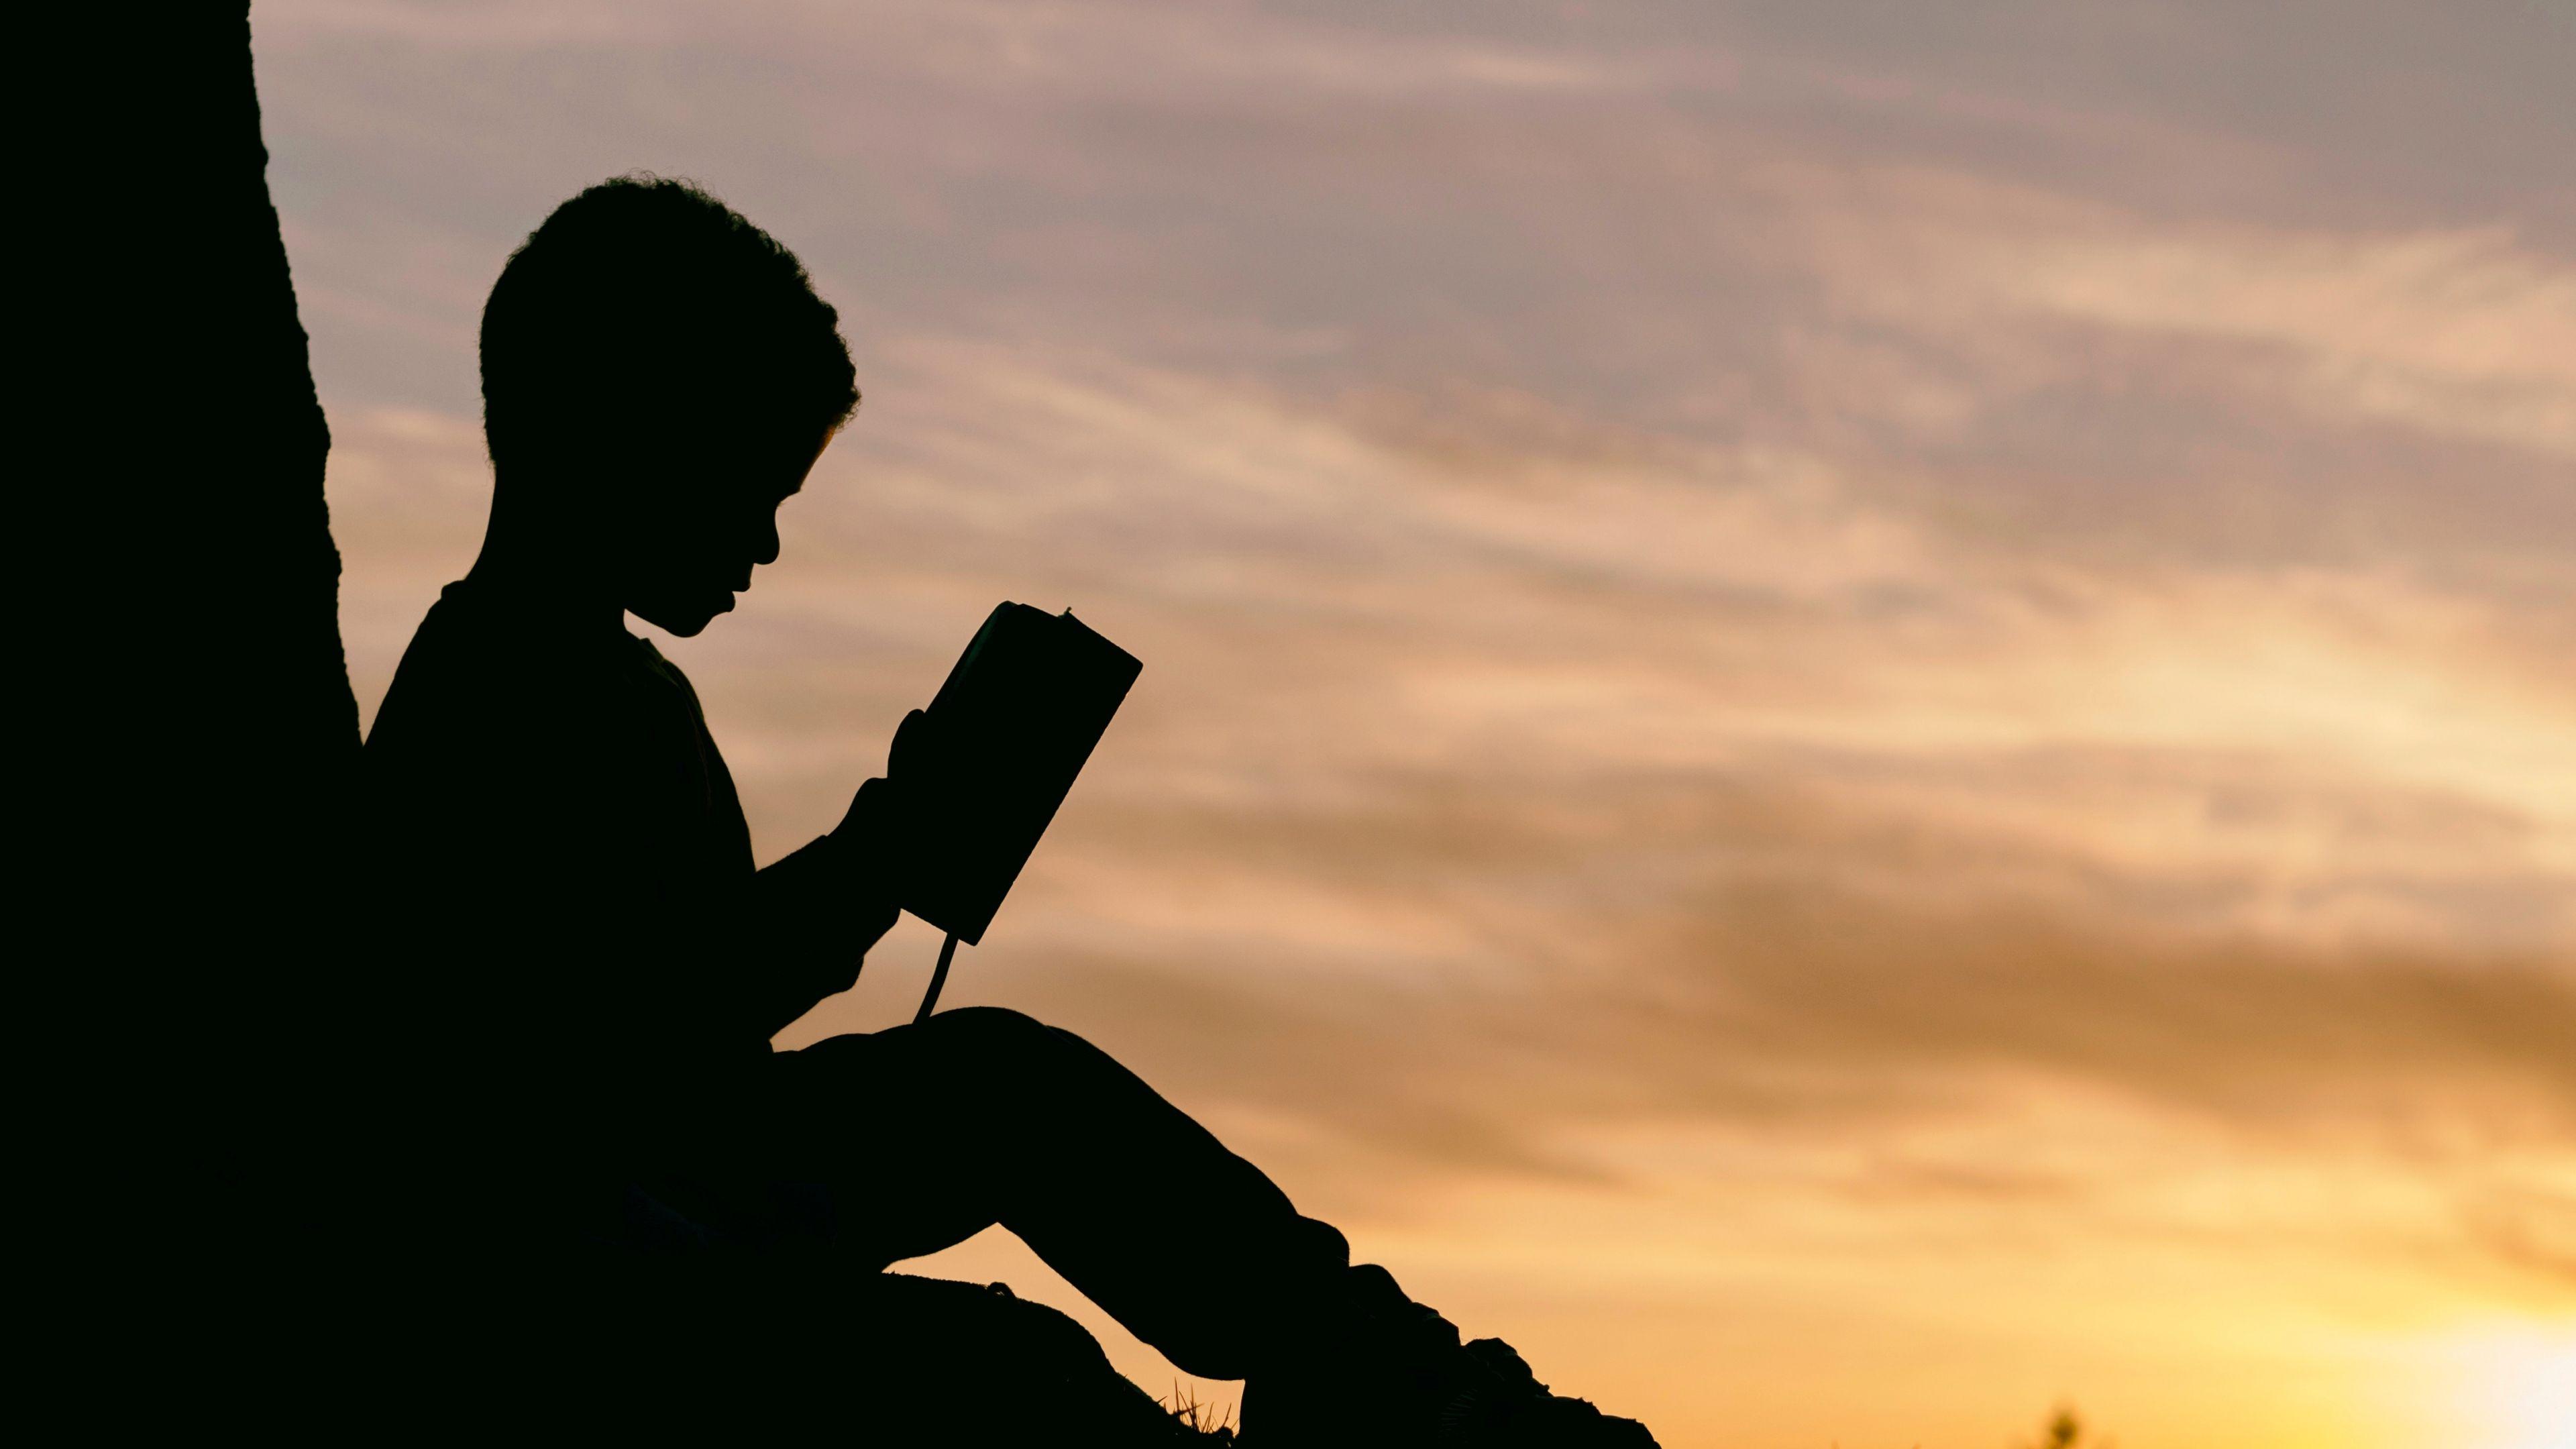 Download Wallpaper 3840x2160 Child, Silhouette, Book, Sunset